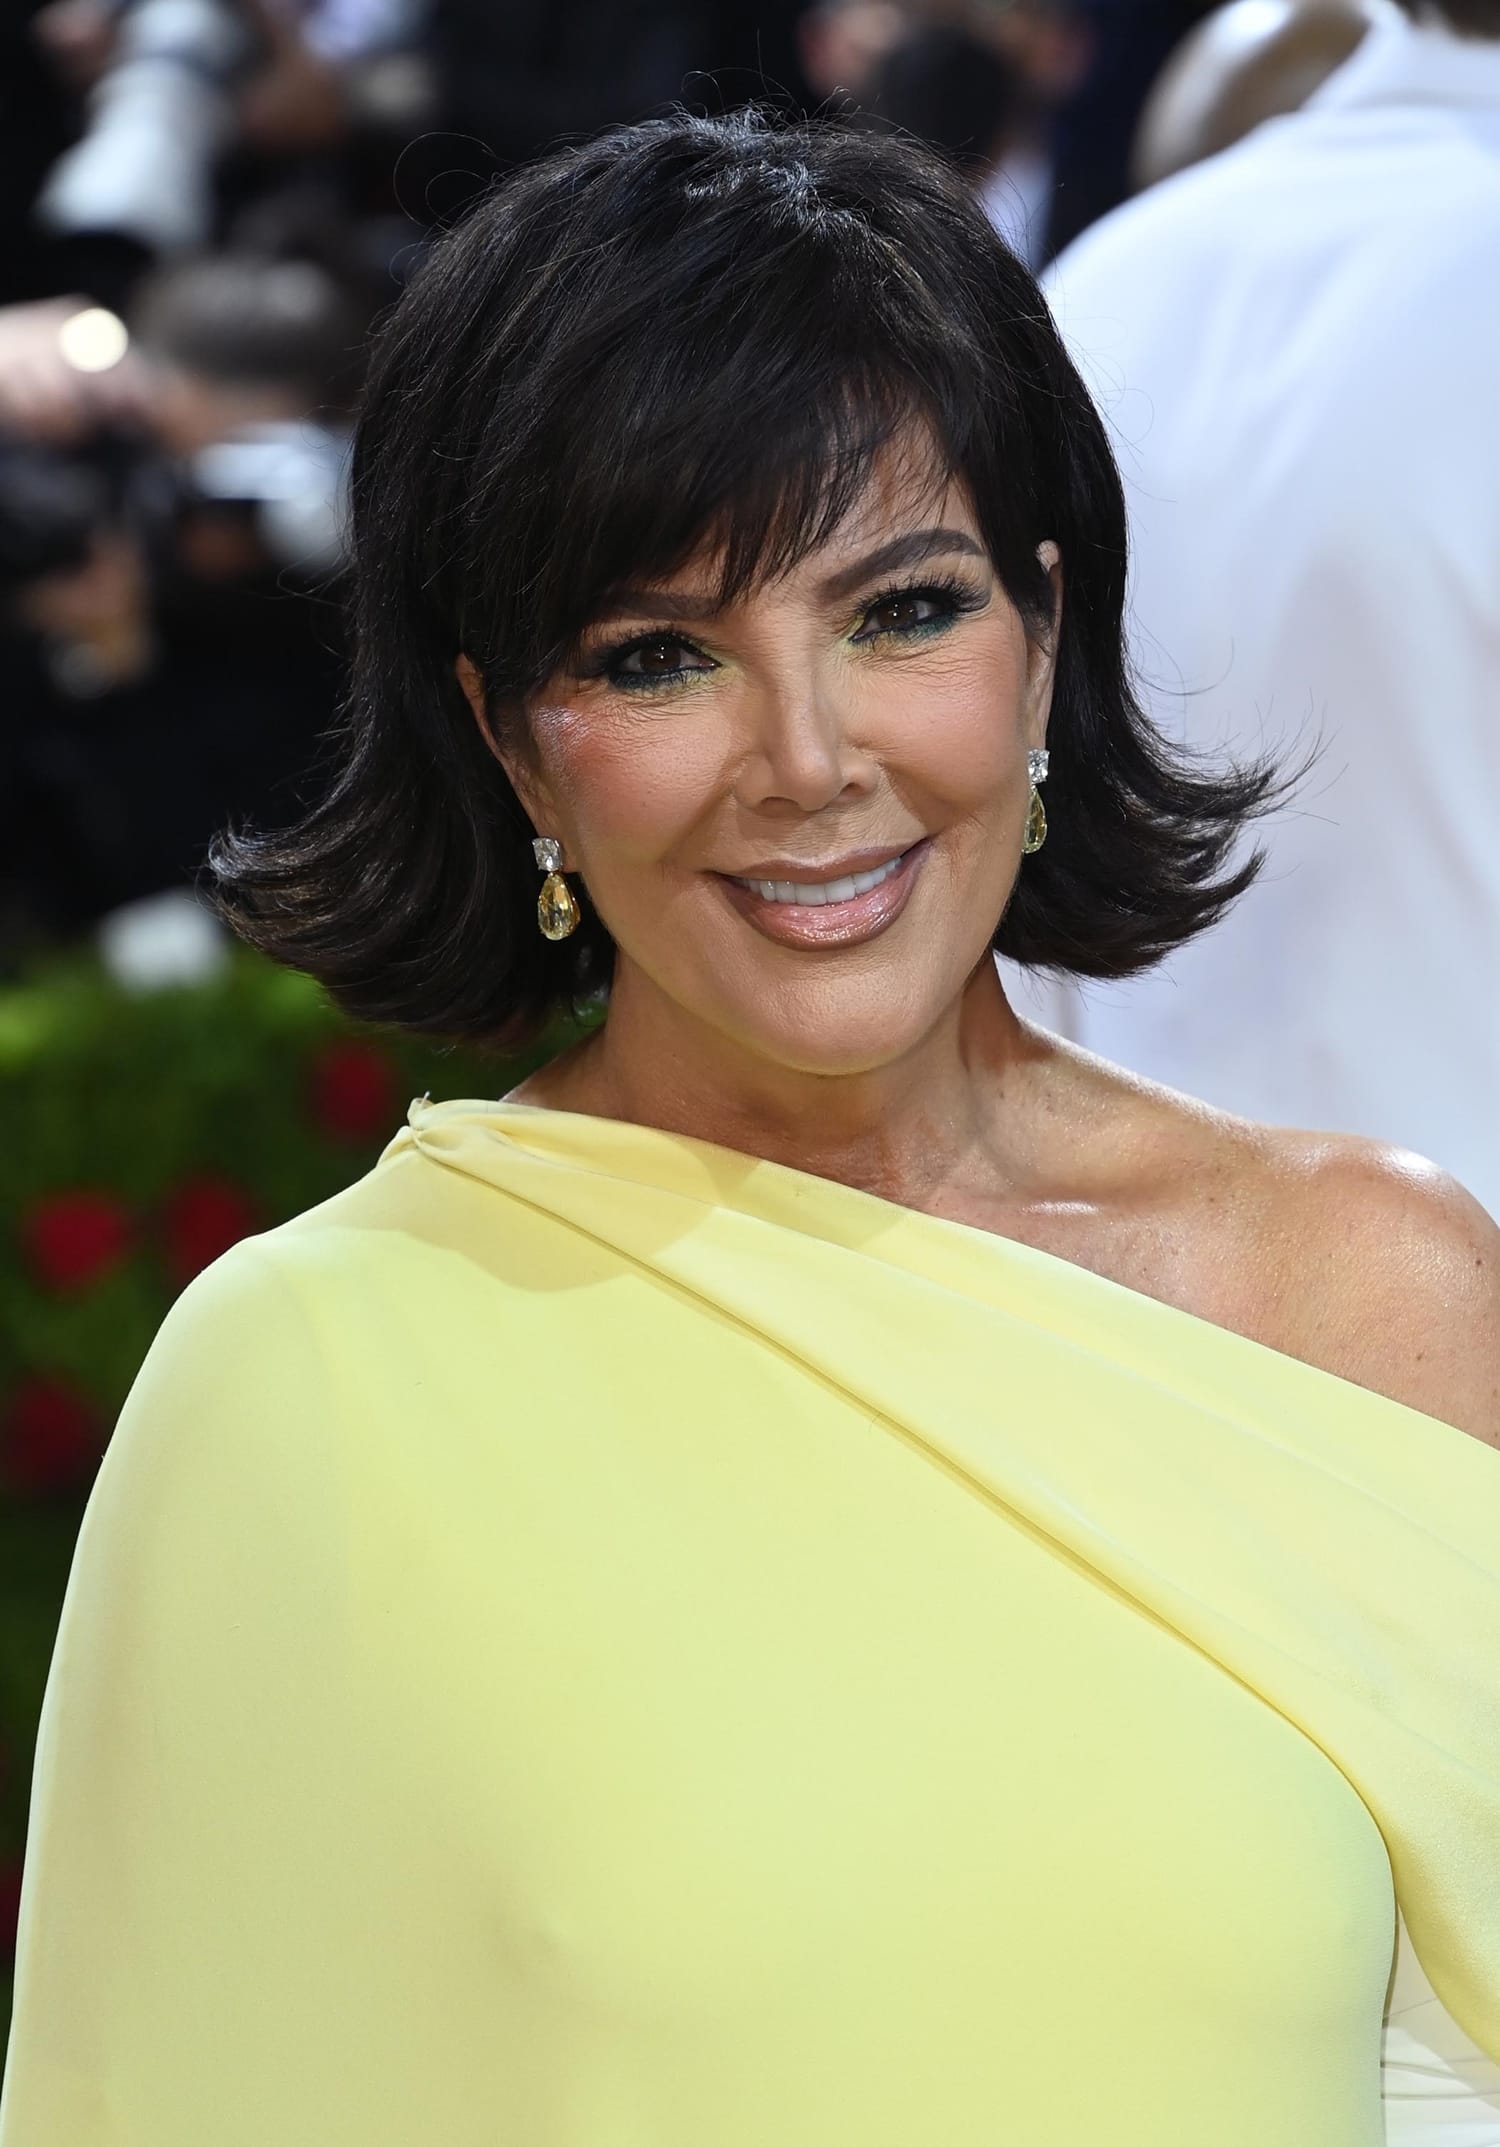 Kris Jenner completed her look with Lorraine Schwartz jewelry and old-school hair